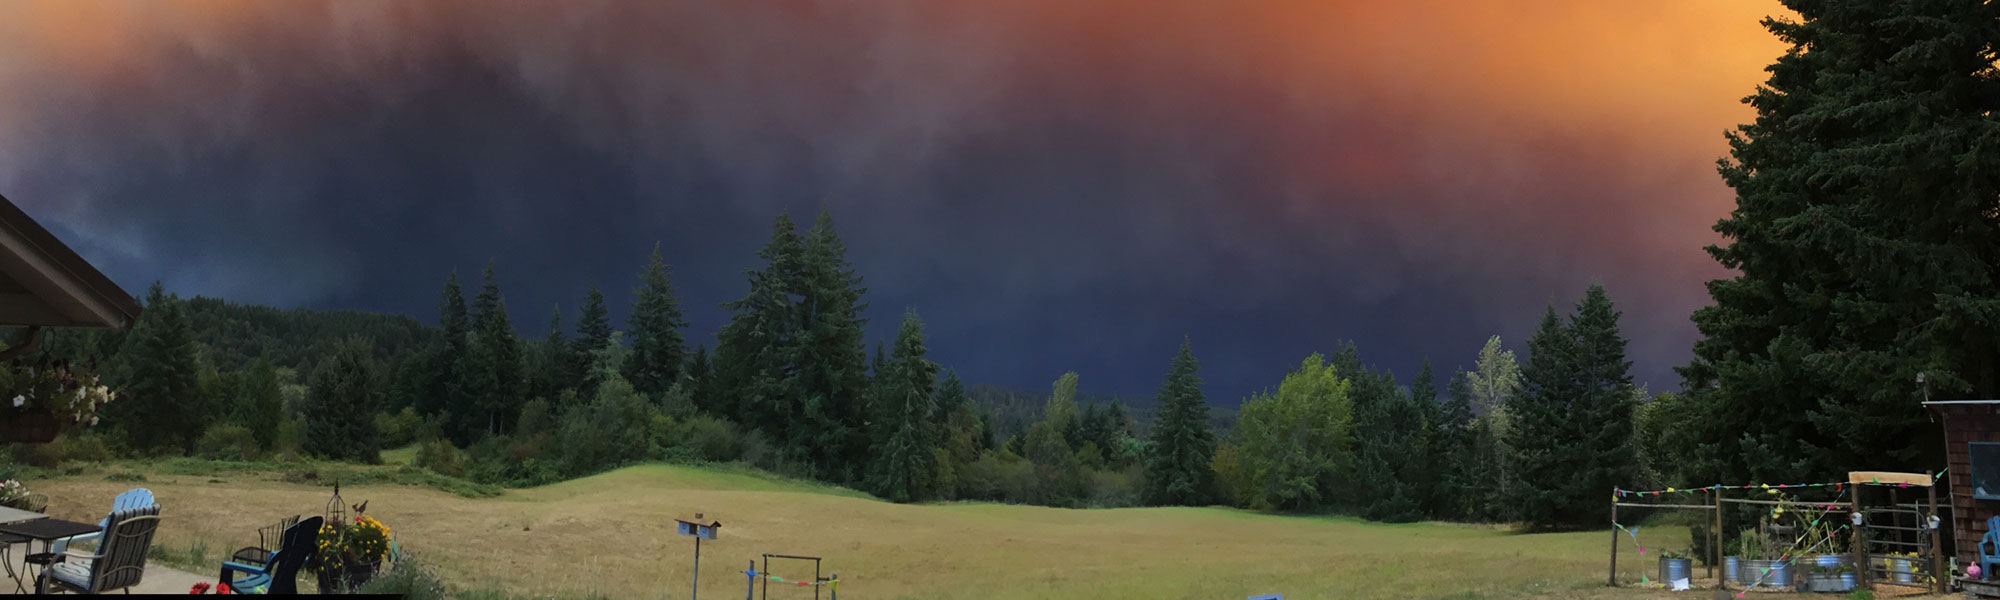 Tree line in front of a smoky horizon due to a wildfire